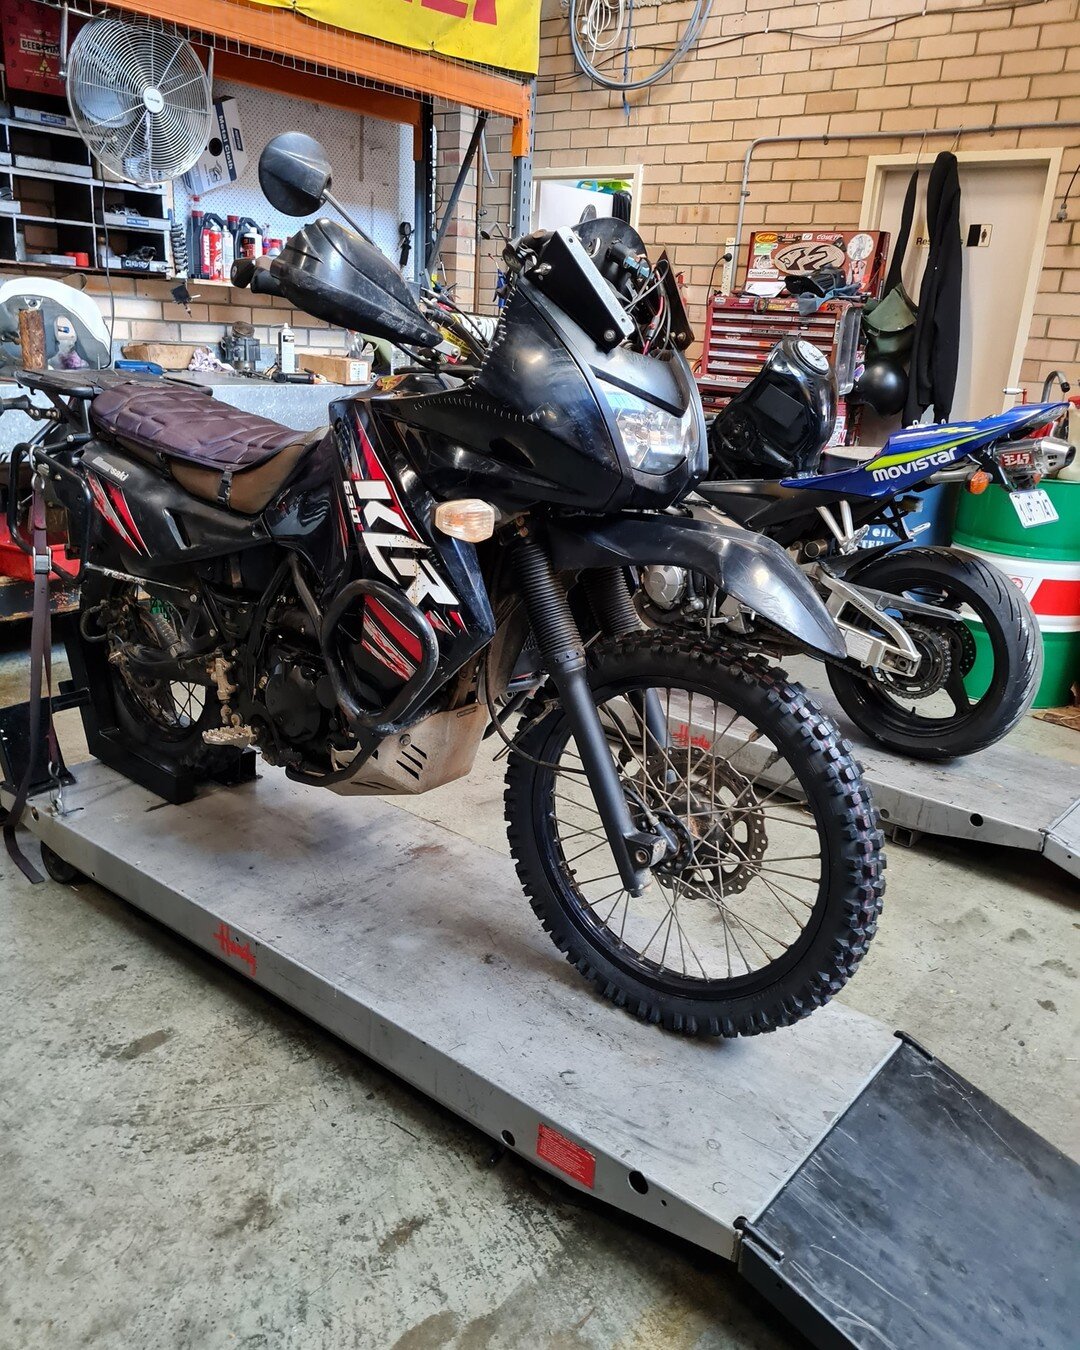 This Klr650 Was in recently for a freshen up on the top end after seizing the cam cap onto the cam. We fitted a new head to the bike and got it back on the road for a happy client :) 2 fresh tyres were also fitted before we sent it home to our happy 